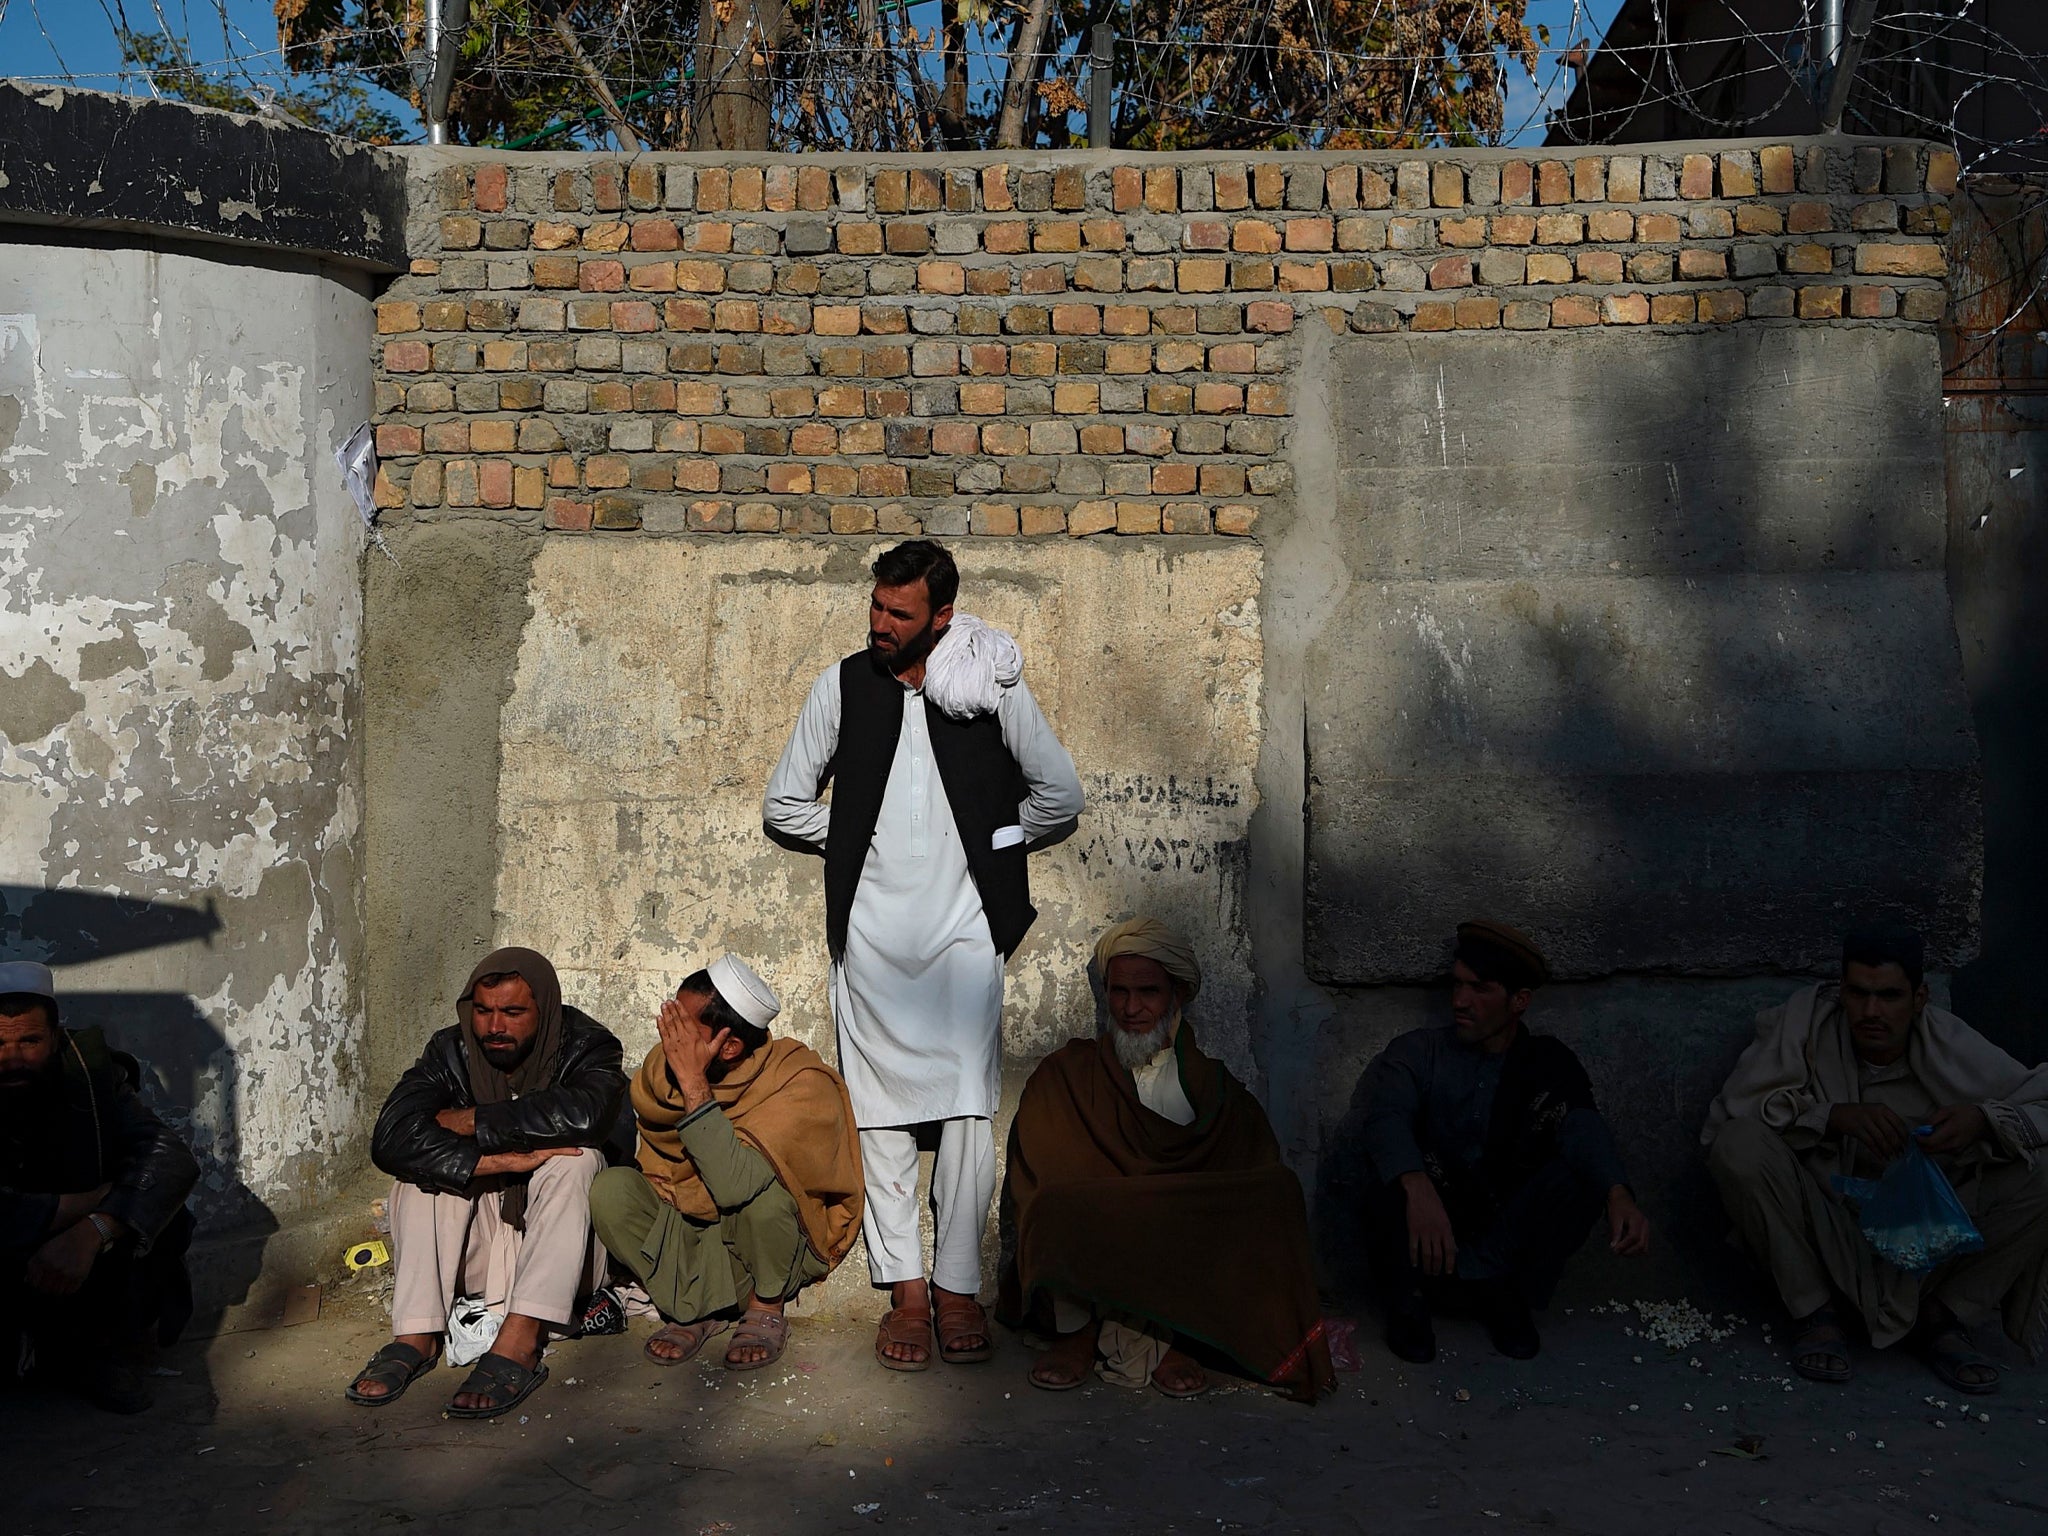 Afghans waiting for their visas outside Pakistan’s embassy, in Kabul on 4 November, 2019